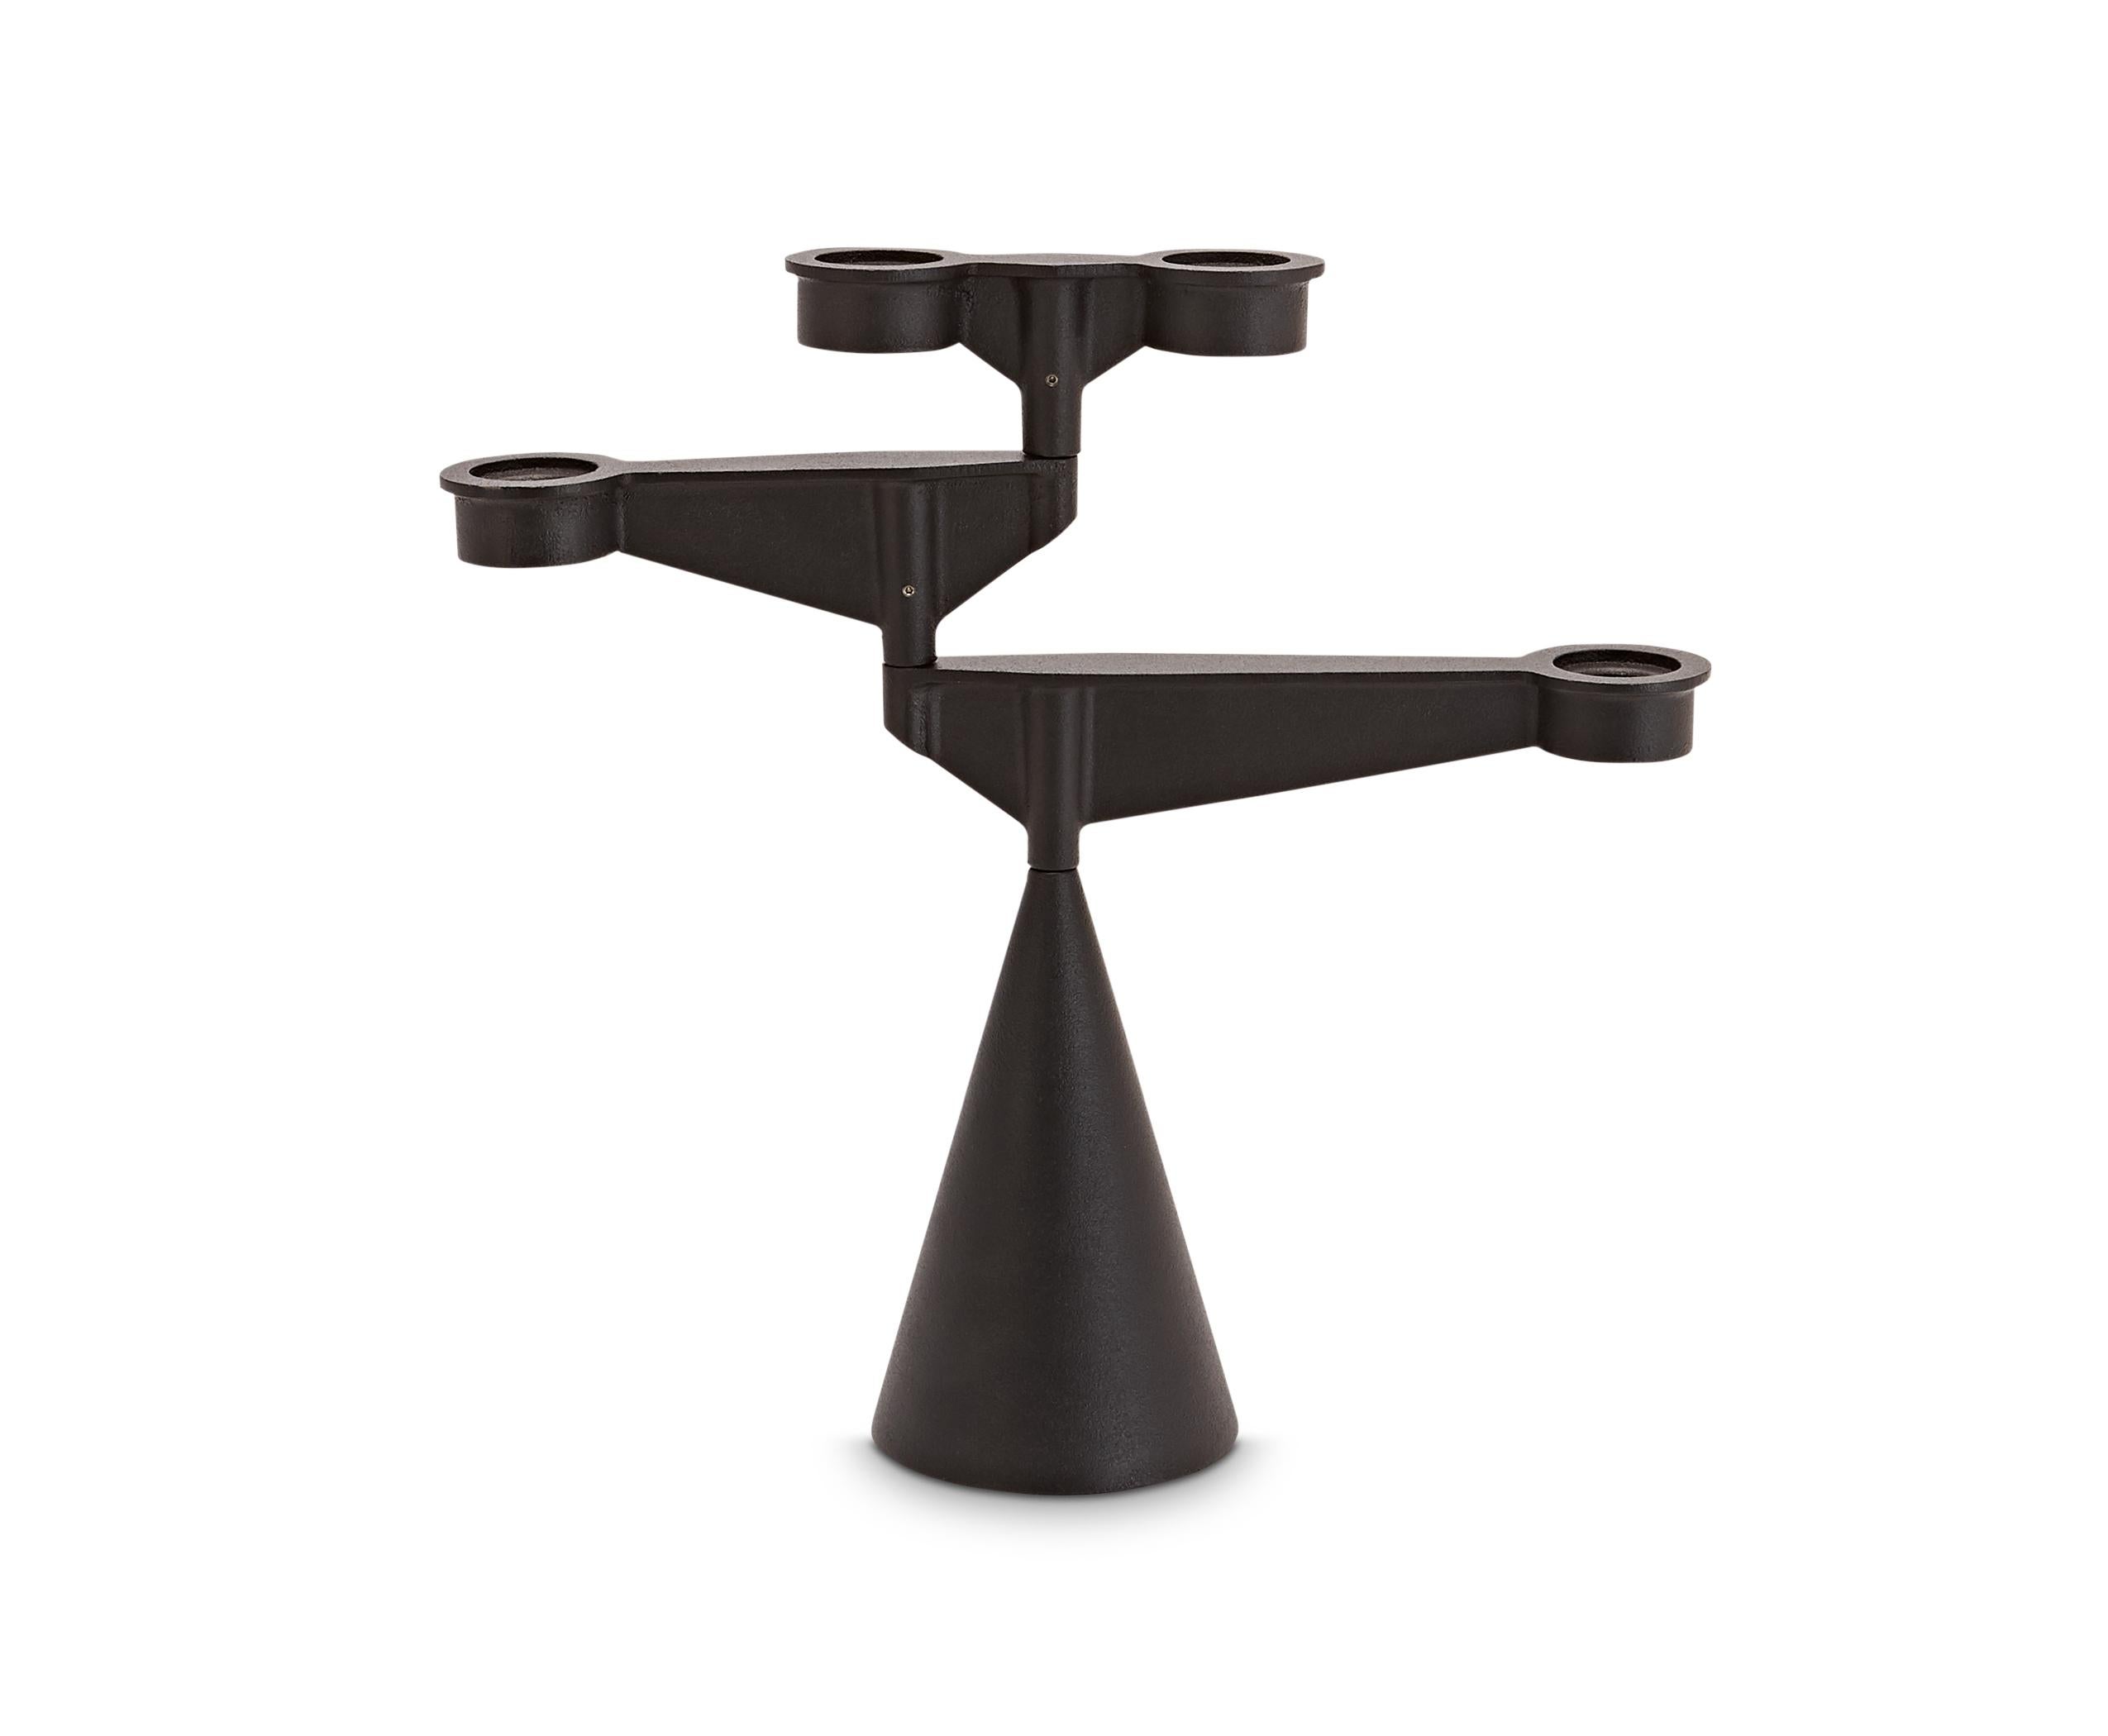 An industrial-strength piece of table-top engineering designed to act as a kinetic centrepiece and produce infinite arrangements. Able to hold tea lights and taper candles with equal elegance, the cast iron contraption takes cues from the